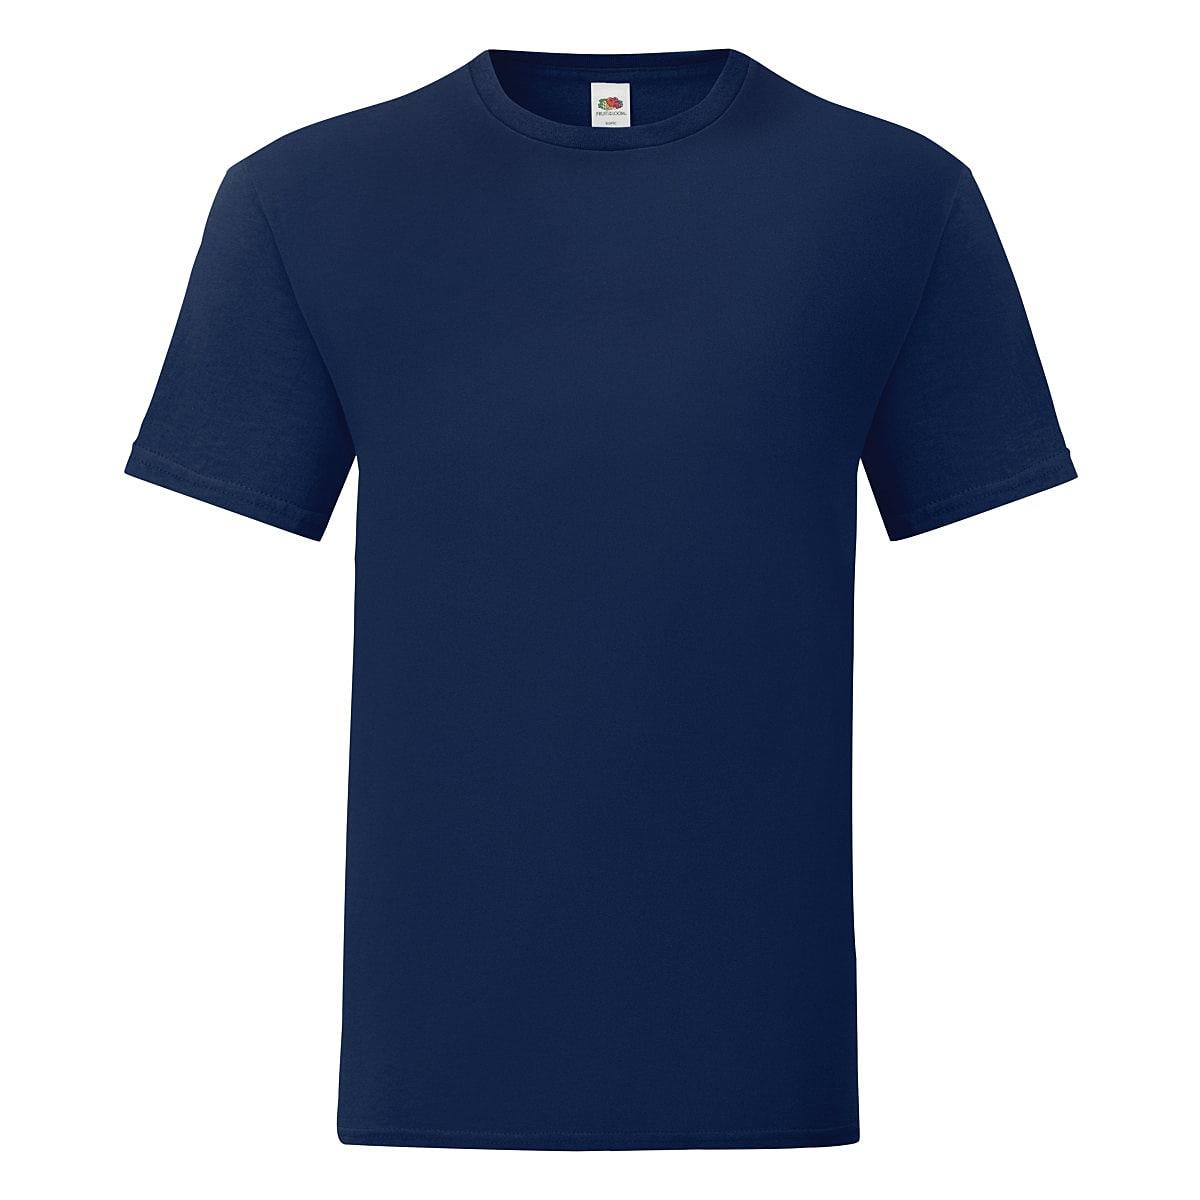 Fruit Of The Loom Mens Iconic T-Shirt in Navy Blue (Product Code: 61430)